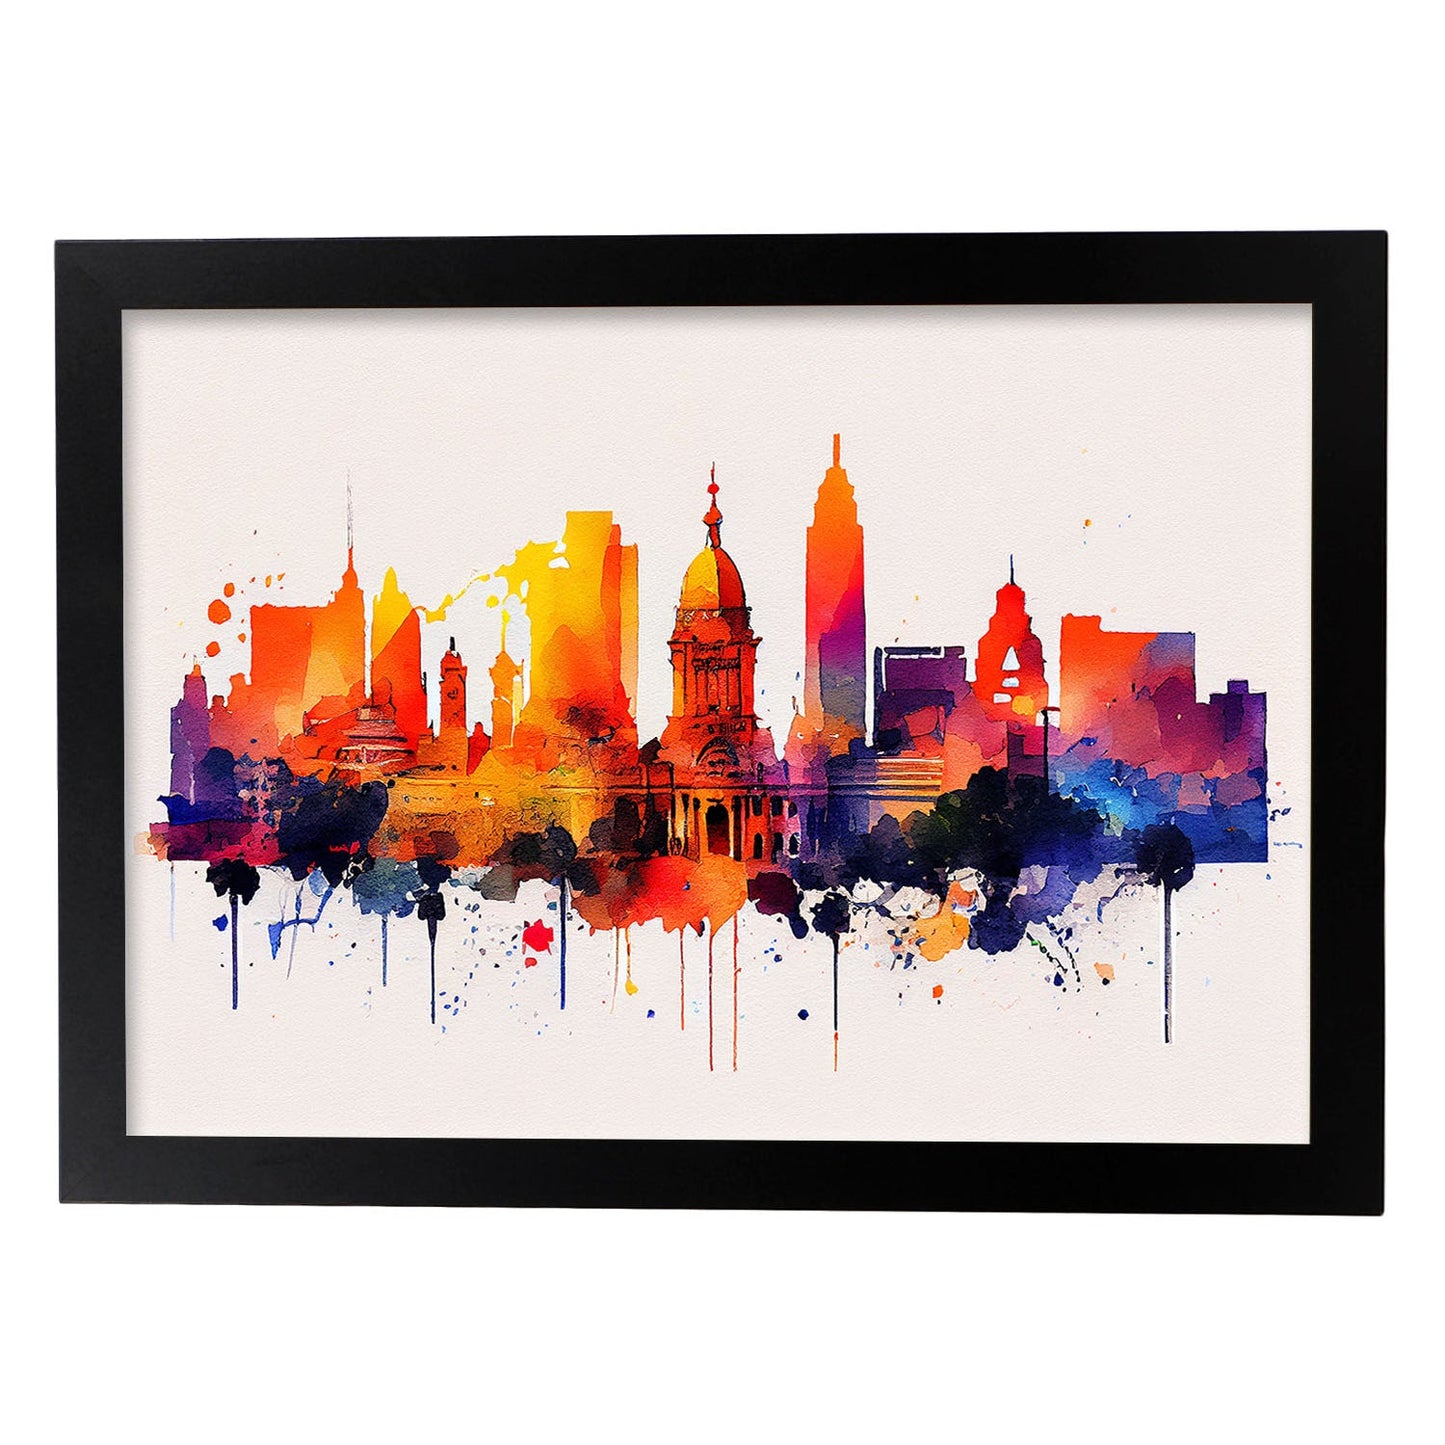 Nacnic watercolor of a skyline of the city of Buenos Aires_2. Aesthetic Wall Art Prints for Bedroom or Living Room Design.